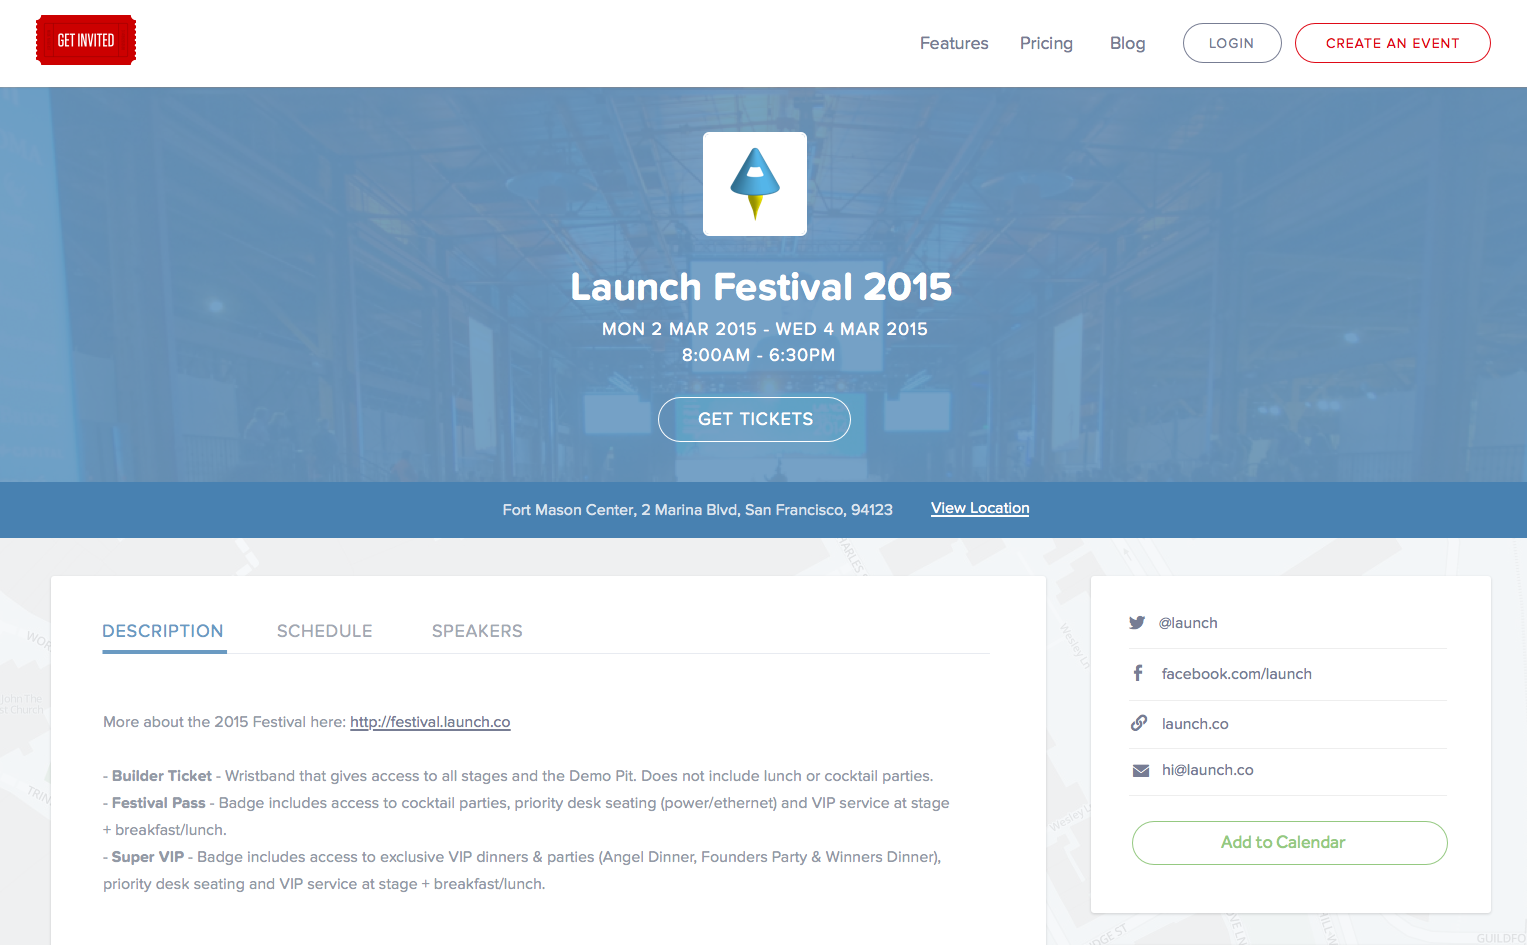 Get Invited - Launch Festival